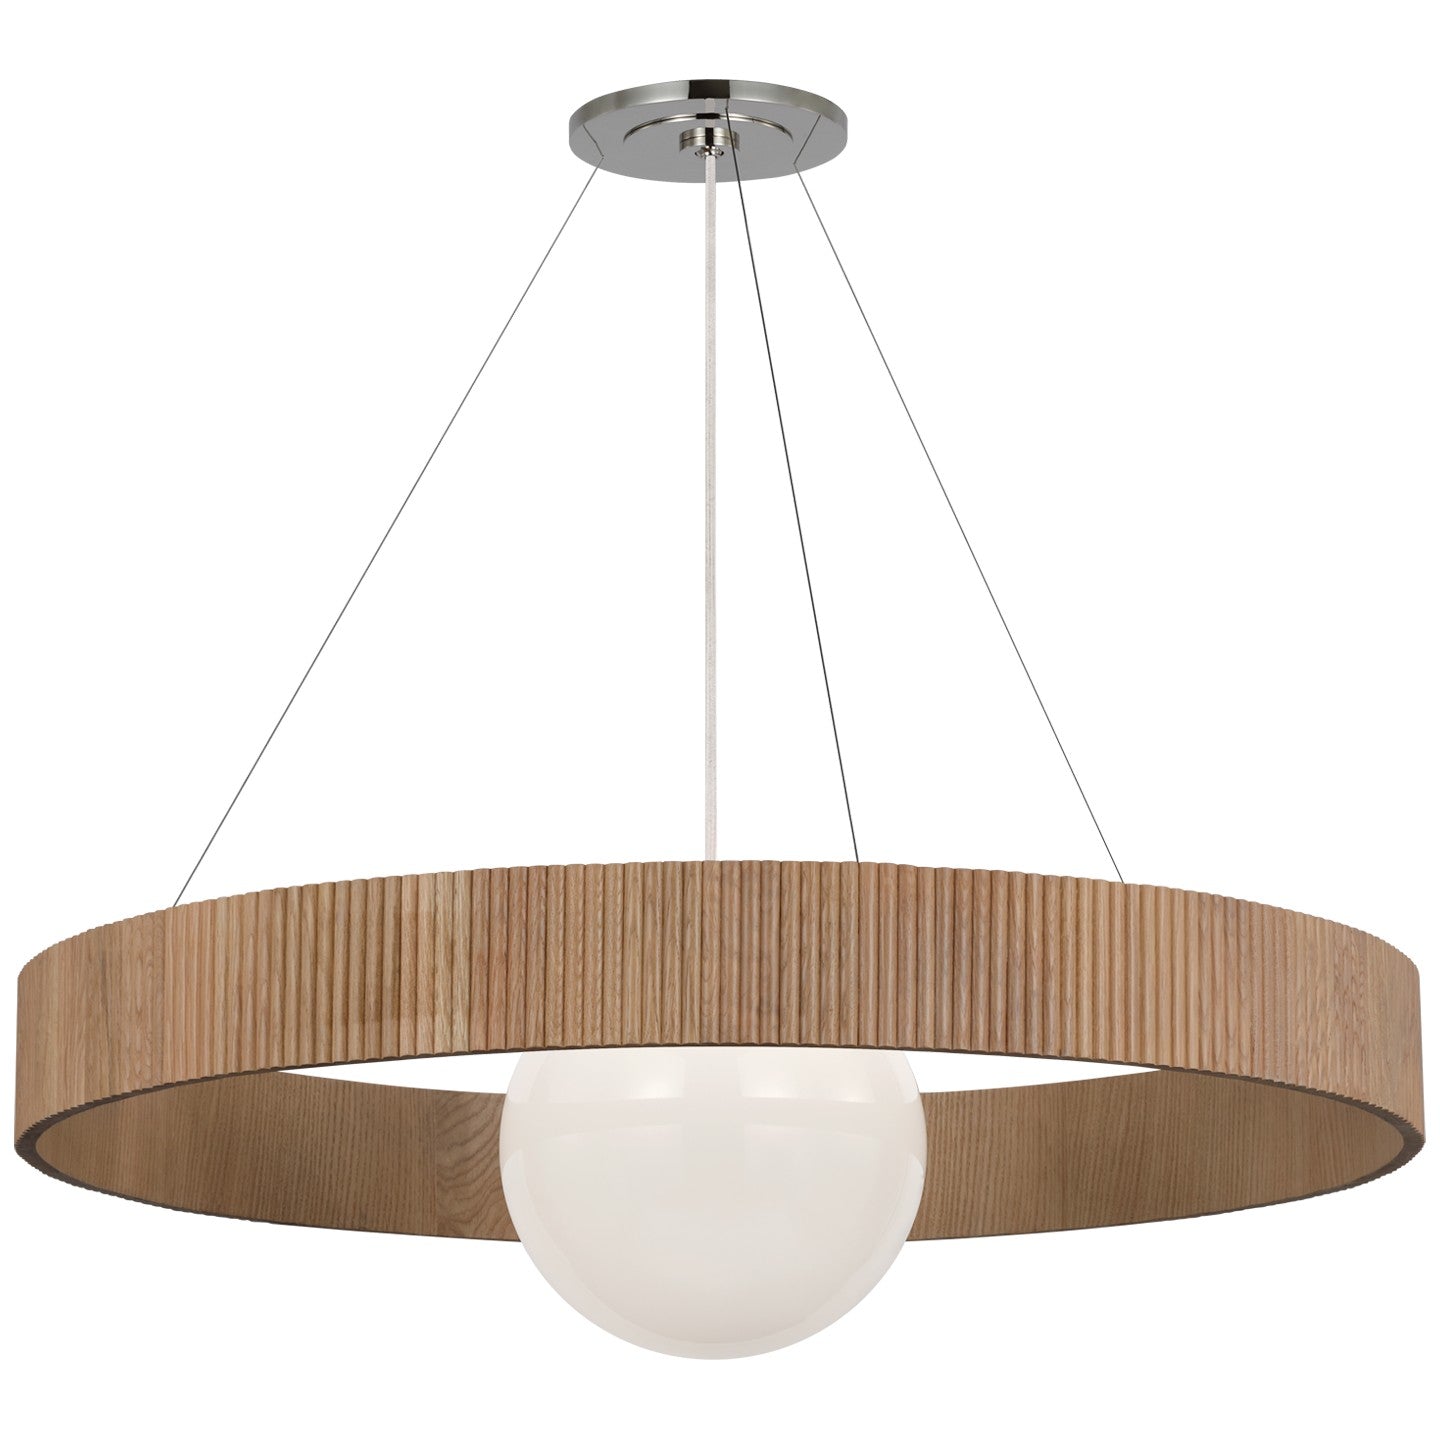 Visual Comfort Signature - WS 5001PN/NO-WG - LED Chandelier - Arena - Polished Nickel and White Glass